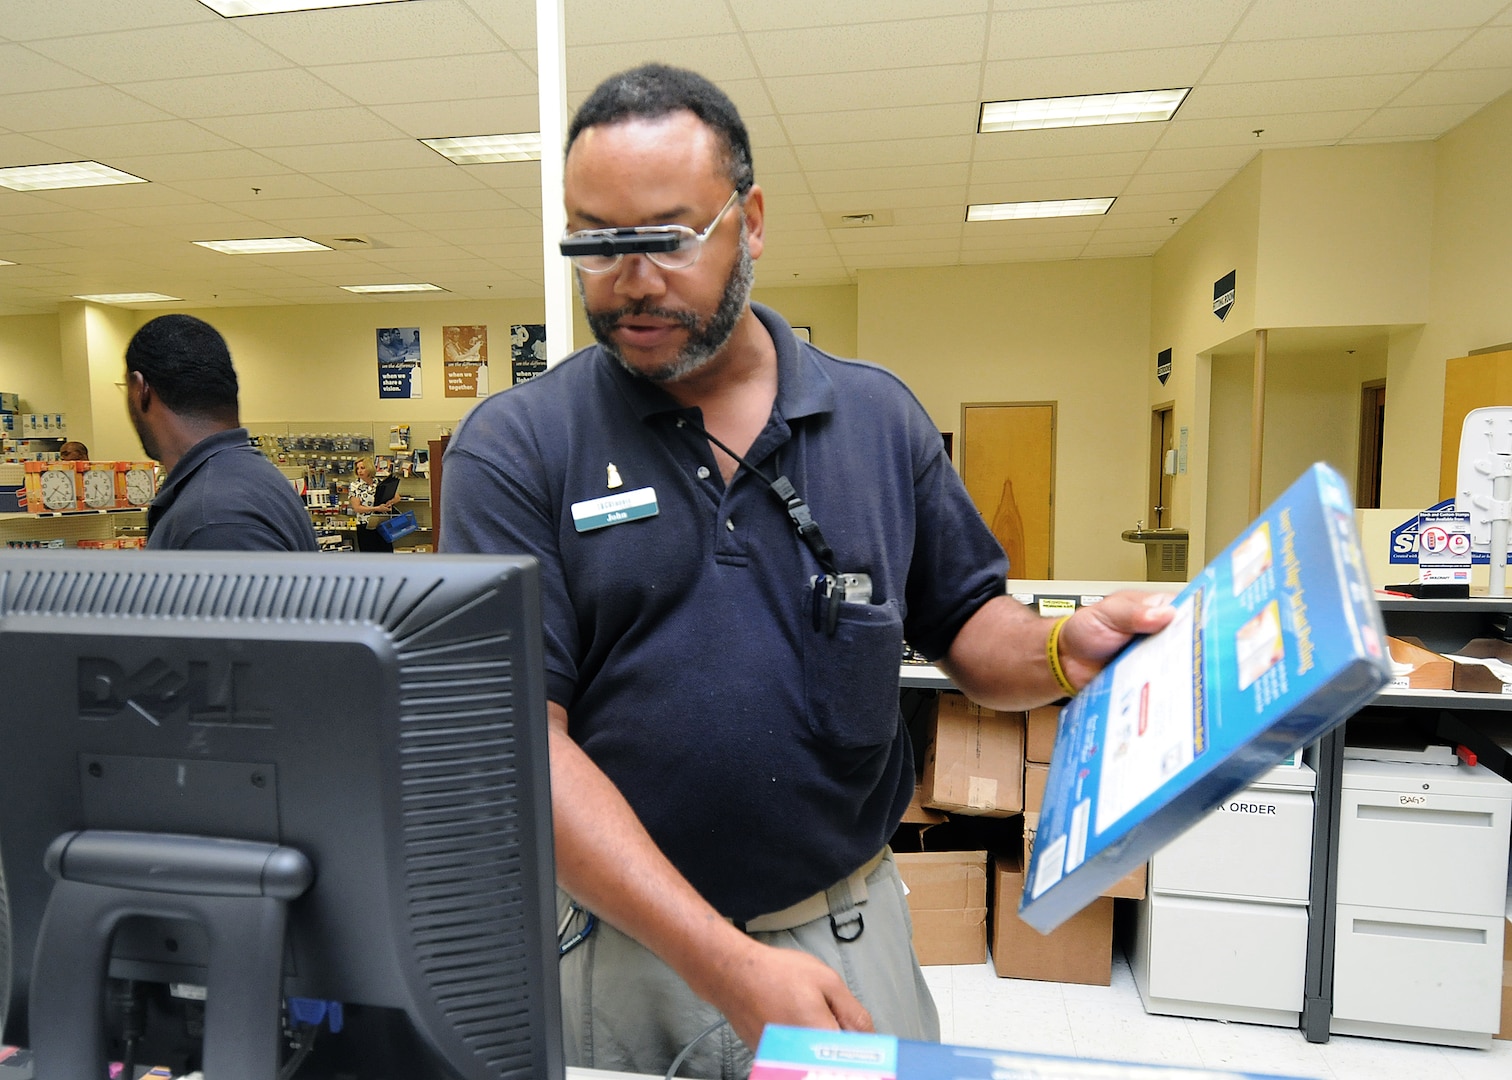 A monocular attached to his glasses allows cashier John Woolridge to read small text at the Randolph Base Service Center. The optical device and a special program which enlarges text on the computer screen has enabled Mr. Woolridge to perform his duties. (U.S. Air Force photo/David Terry)